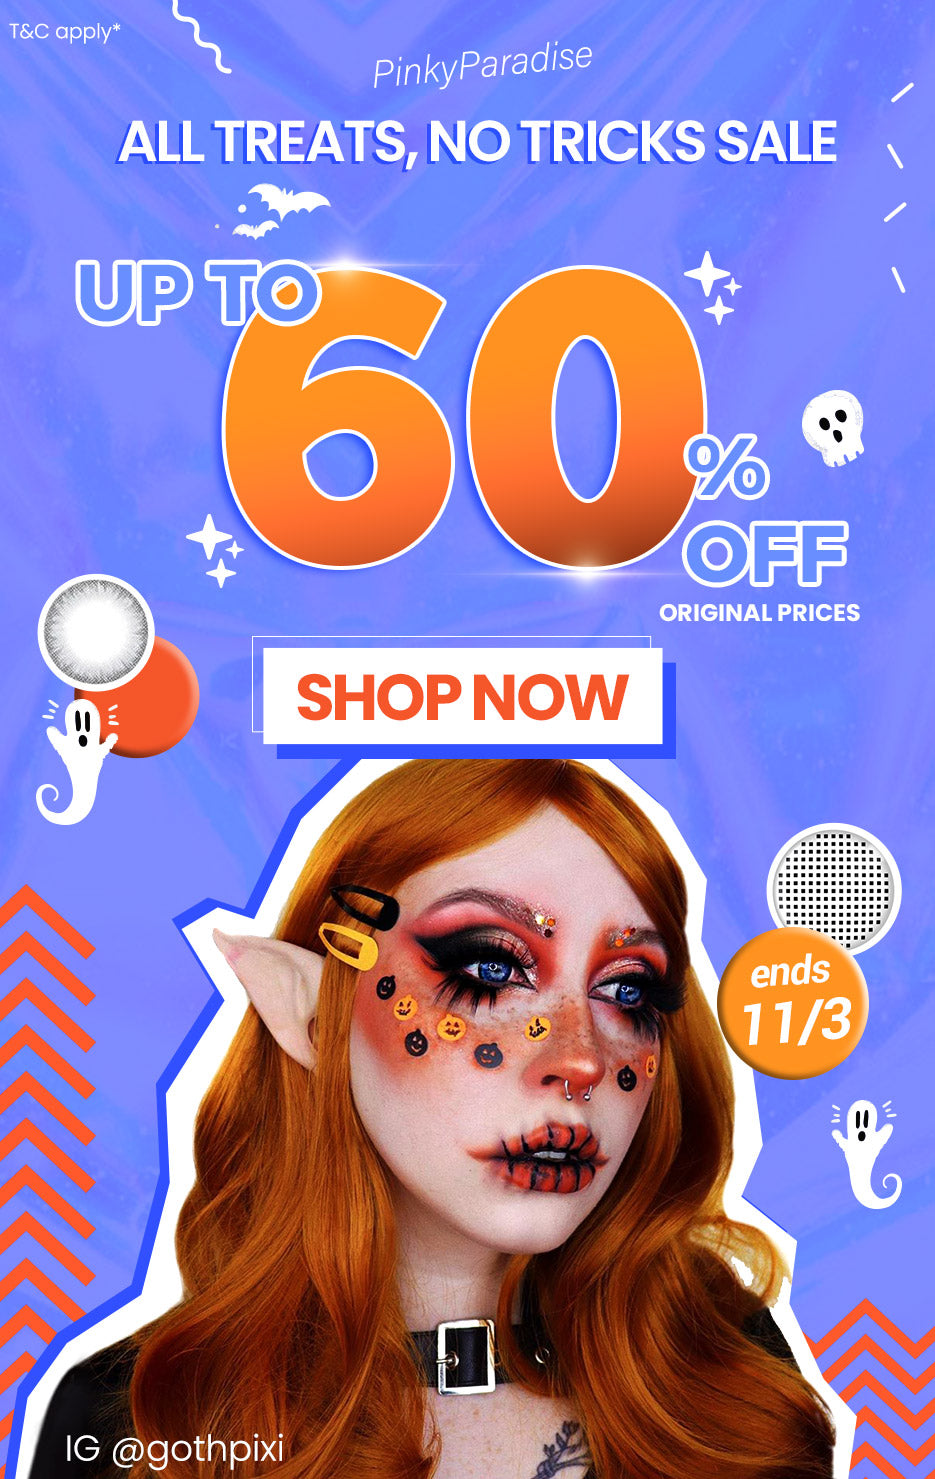 All Treats No Tricks Sale: Up to 60% Off